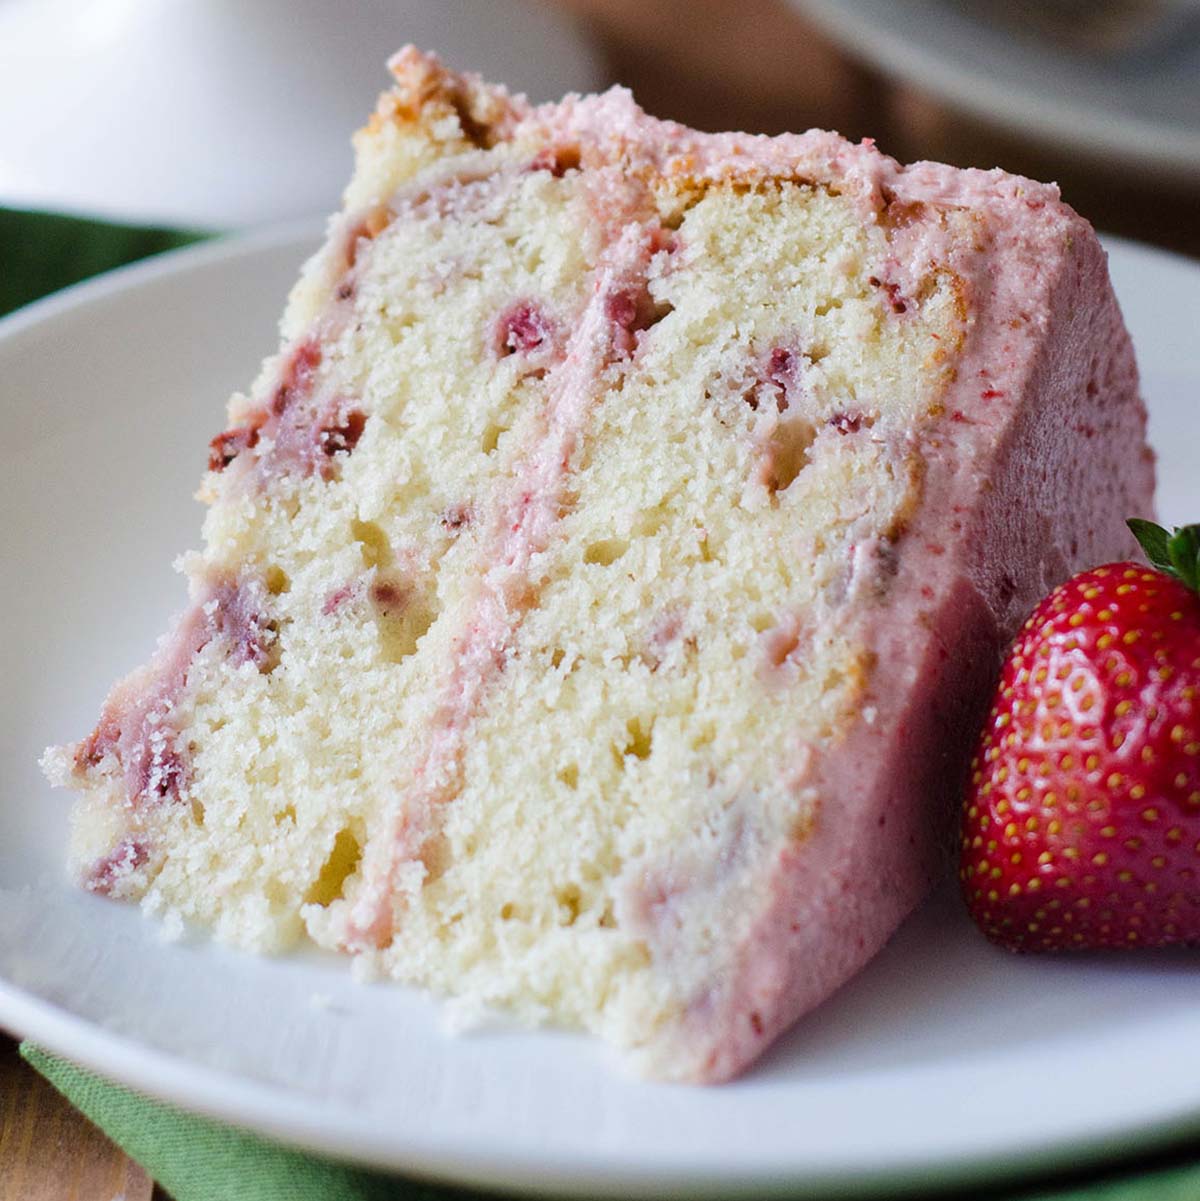 Homemade Strawberry Cake - The Ultimate Strawberry Lover's Cake | Recipe | Homemade  strawberry cake, Strawberry cake recipes, Homemade cakes